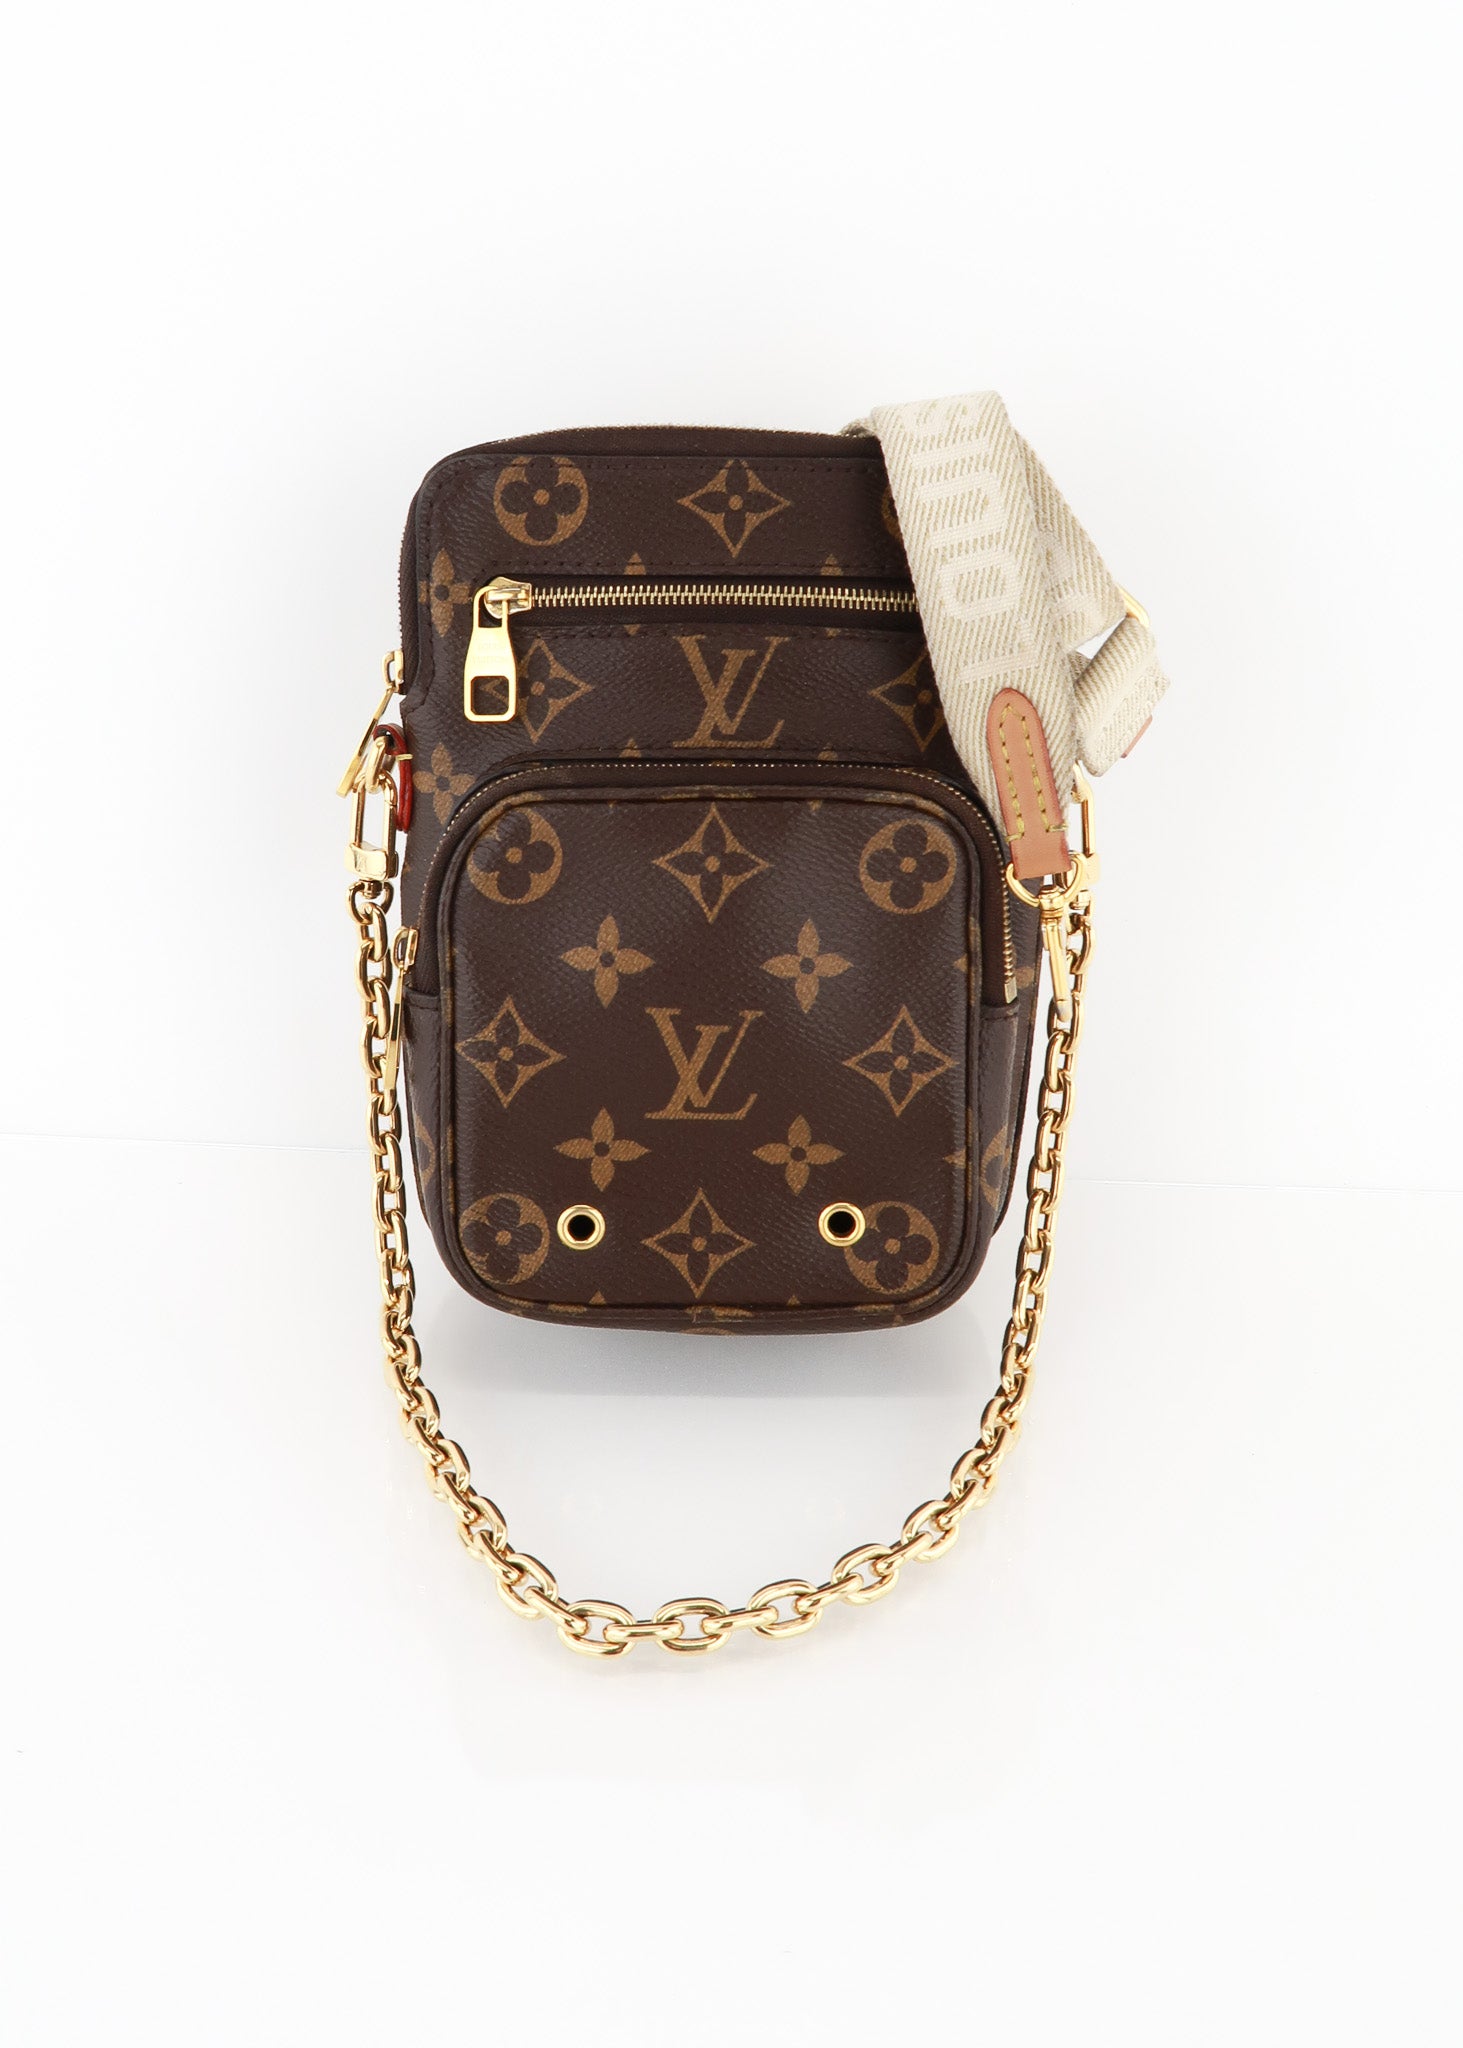 LOUIS VUITTON NICE MINI  CONVERT TO CROSSBODY & WHAT FITS INSIDE